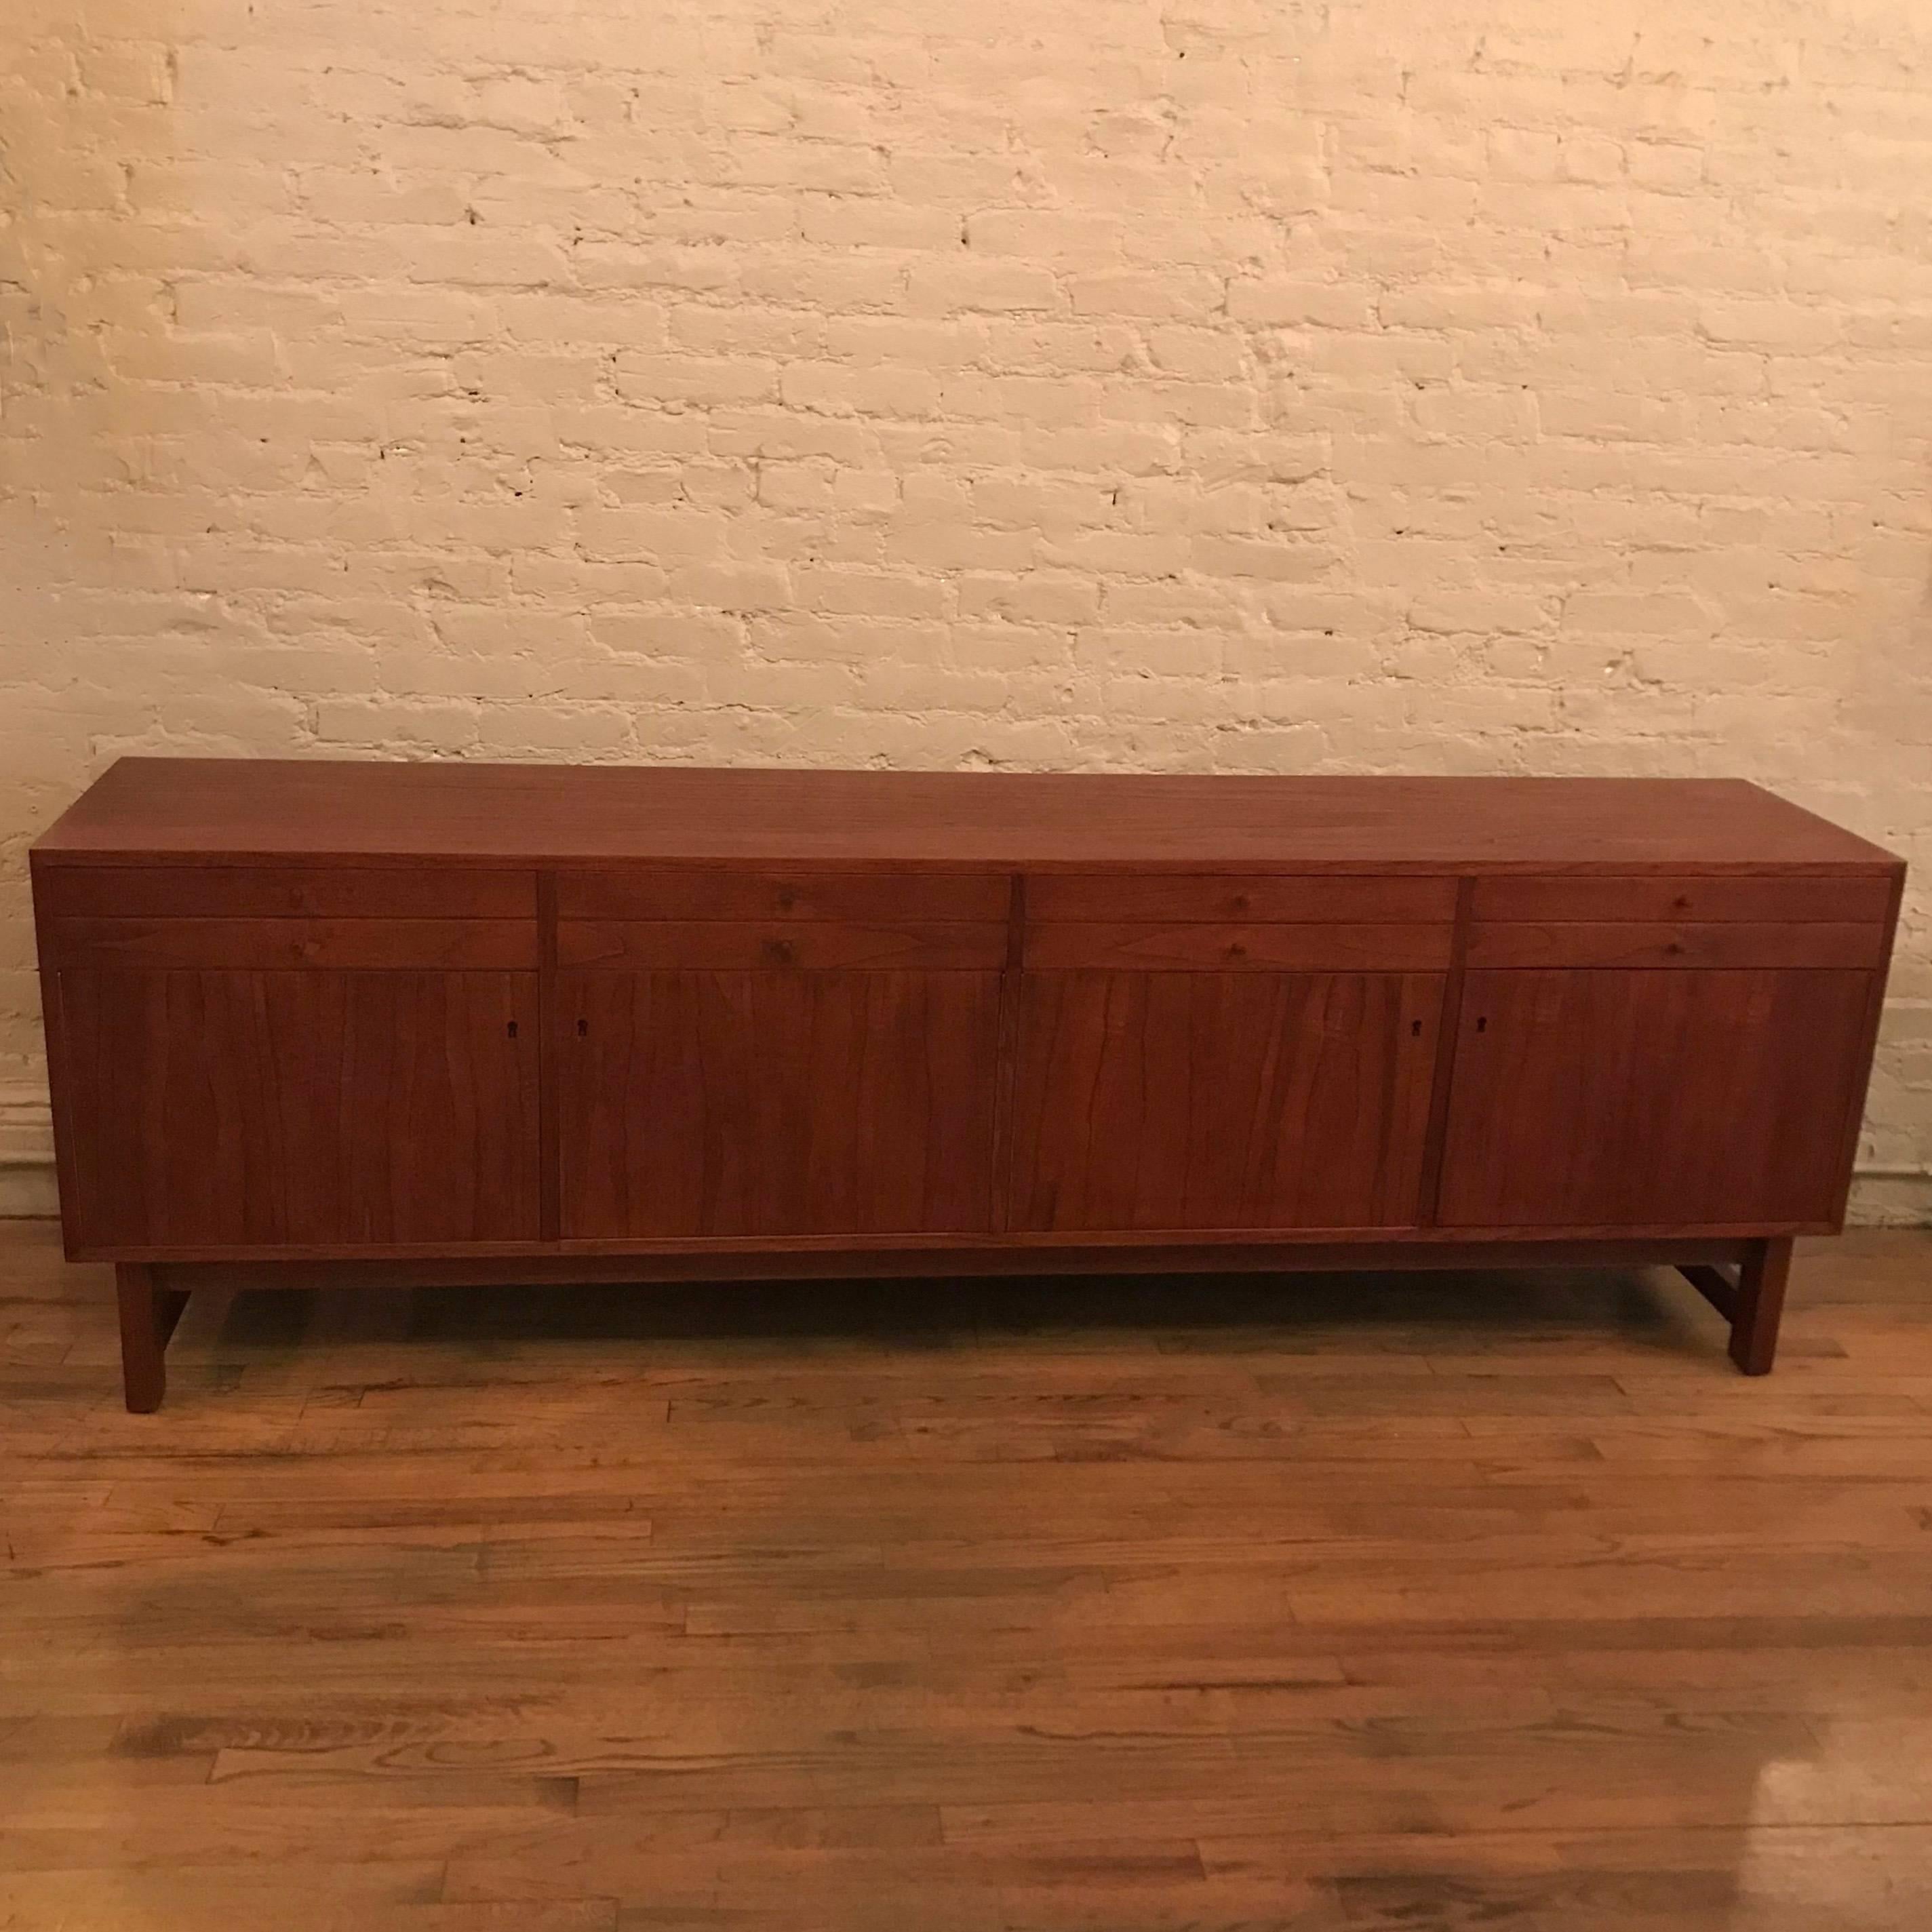 Scandinavian modern, teak credenza or sideboard made in Sweden features top drawers with tubular pulls and lockable cabinets below.